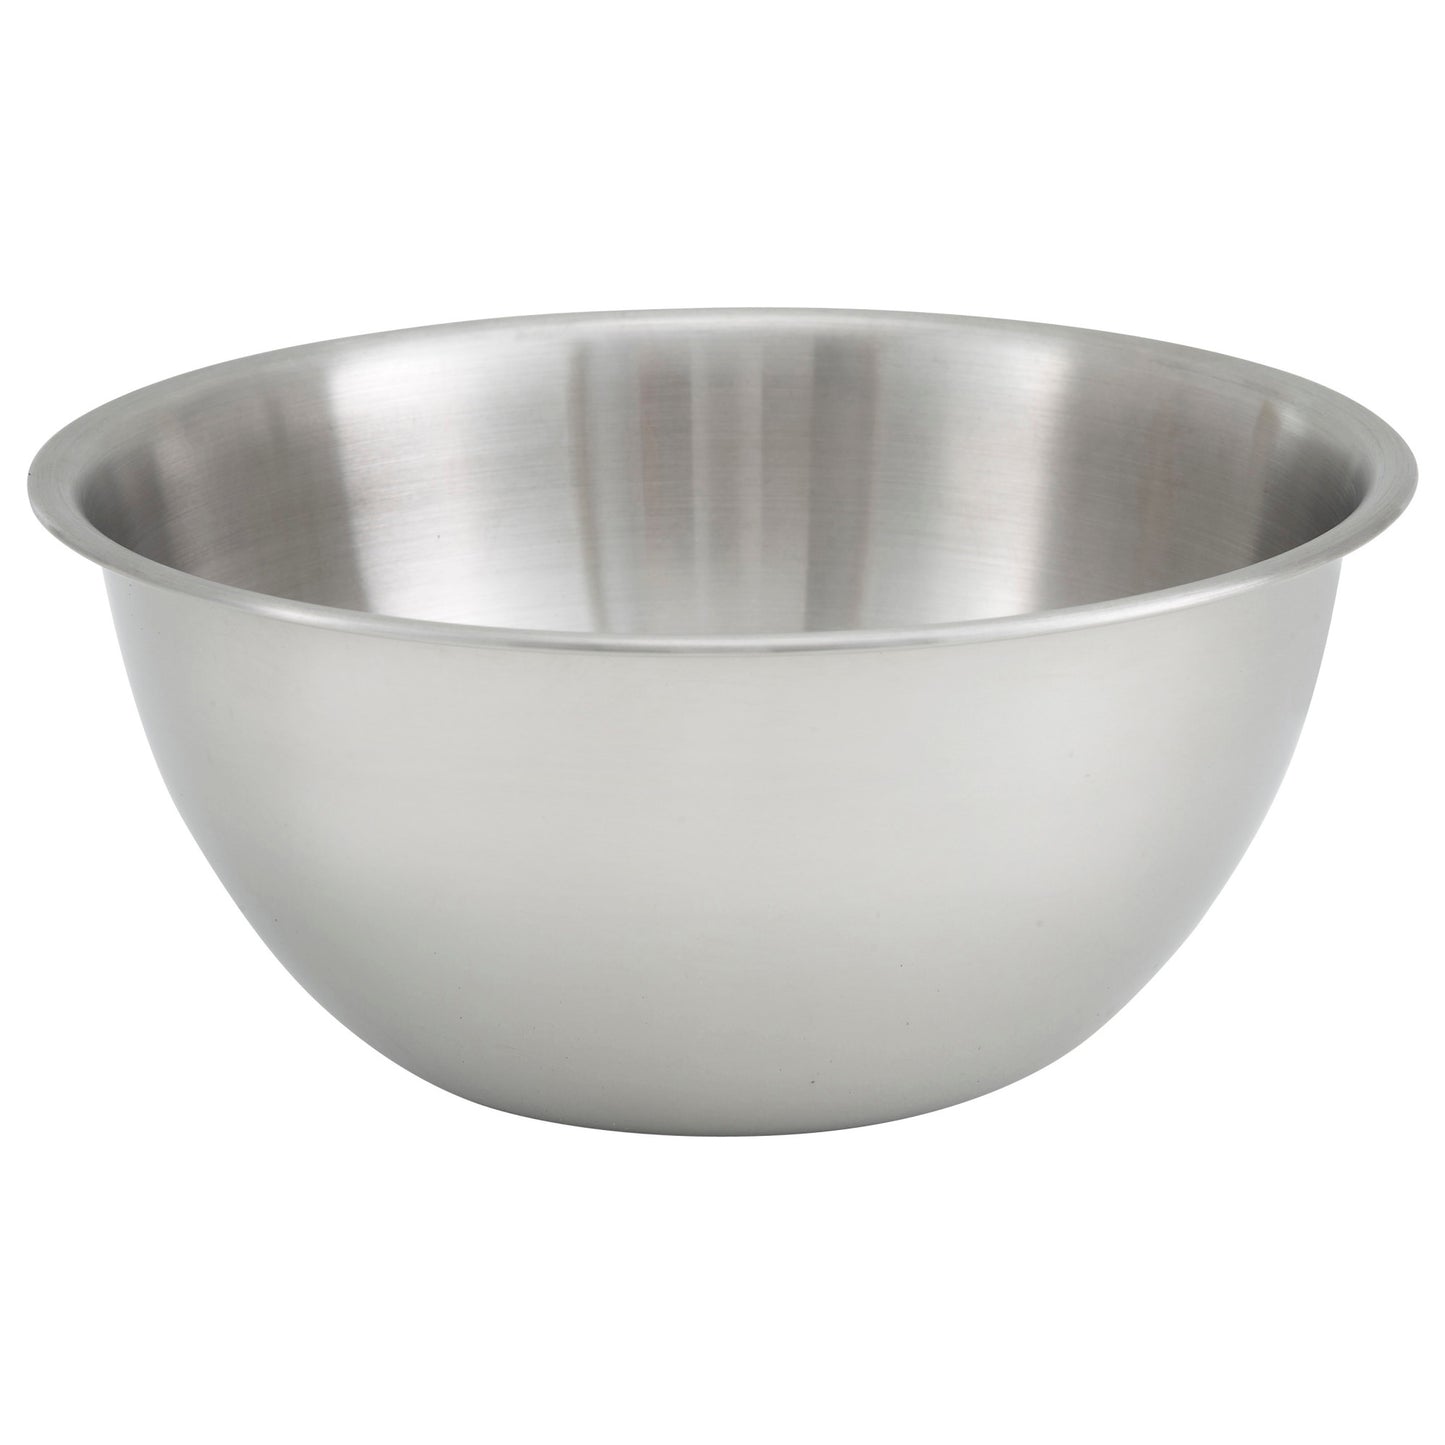 Mixing Bowl, Deep, Heavy-Duty Stainless Steel, 0.6 mm - 3 Quart